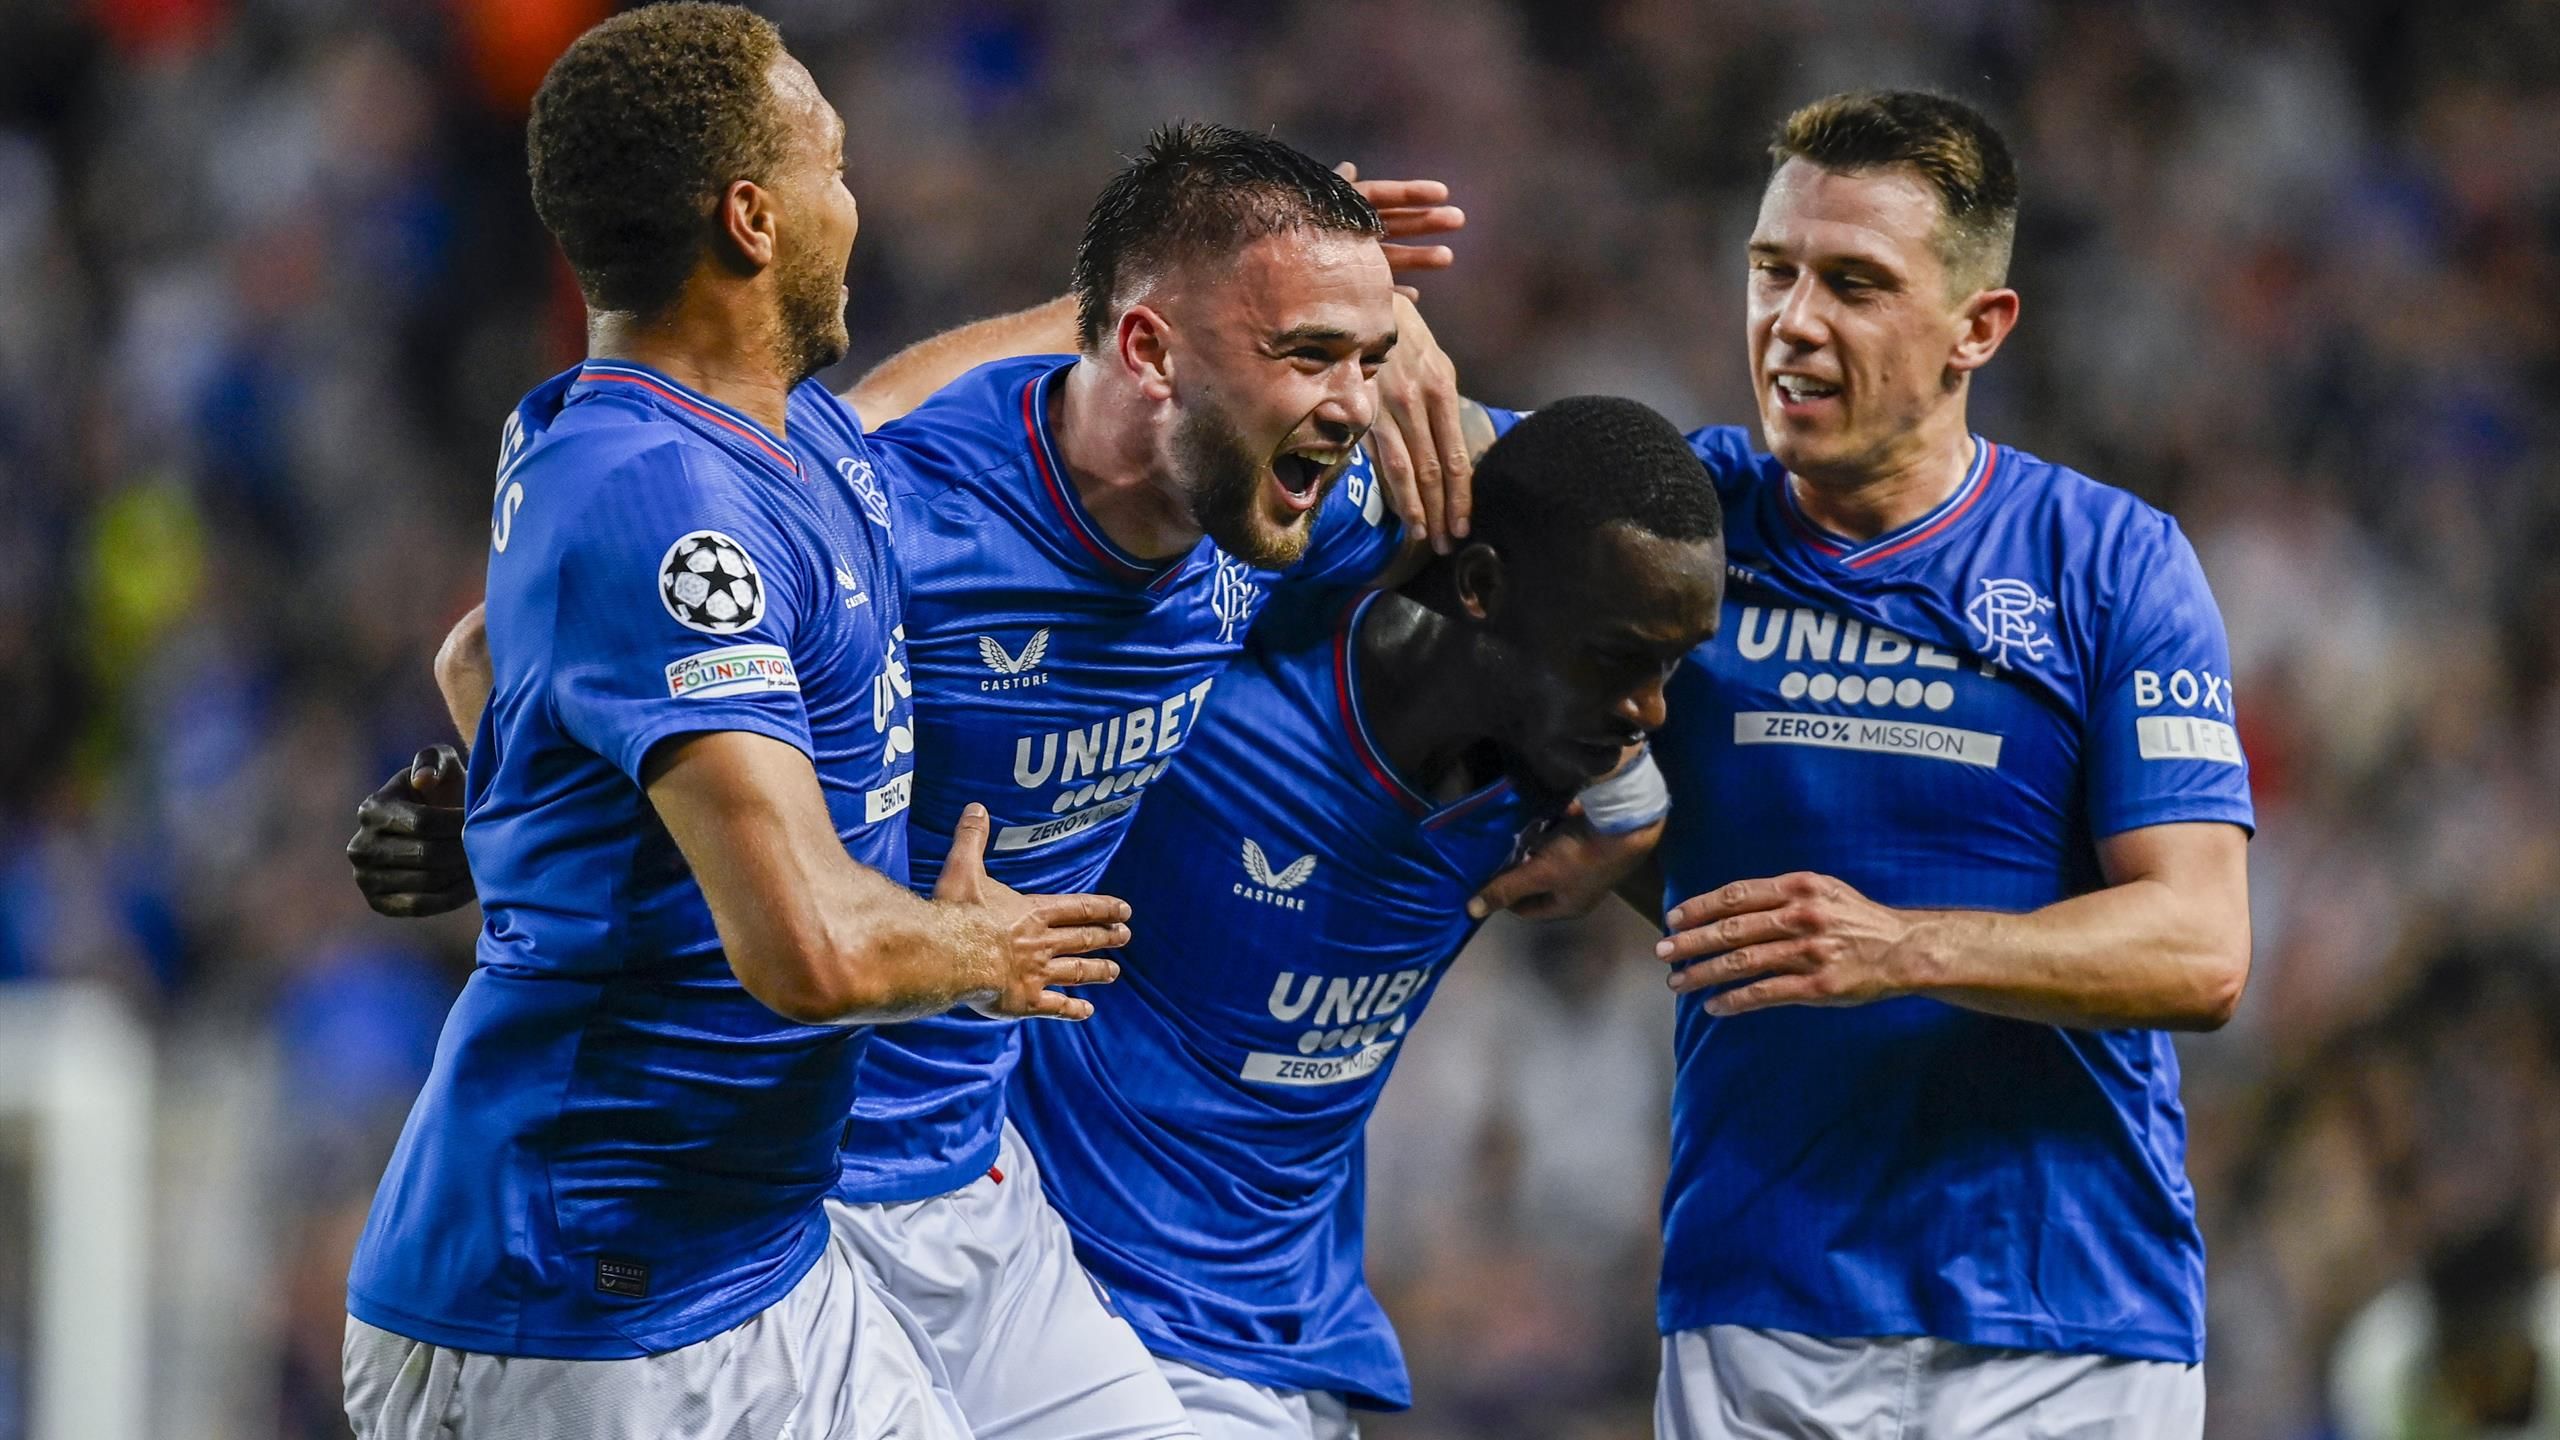 How to watch PSV Eindhoven v Rangers - Champions League second-leg match on TNT Sports, live stream and TV details